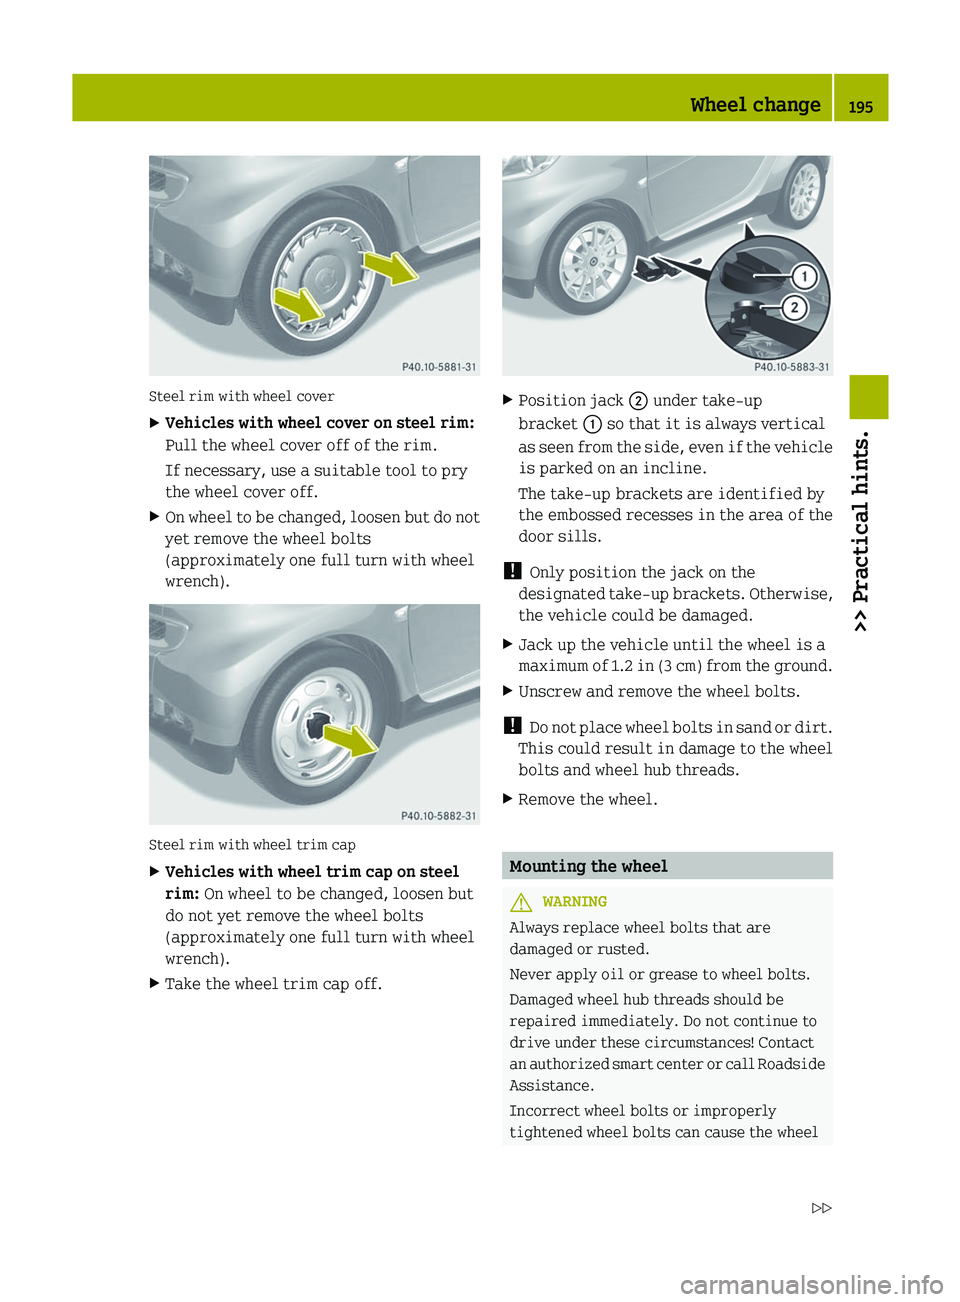 SMART FORTWO COUPE 2012  Owners Manual Steel rim with wheel cover
X
Vehicles with wheel cover on steel rim:
Pull the wheel cover off of the rim.
If necessary, use a suitable tool to pry
the wheel cover off.
X On wheel to be changed, loosen